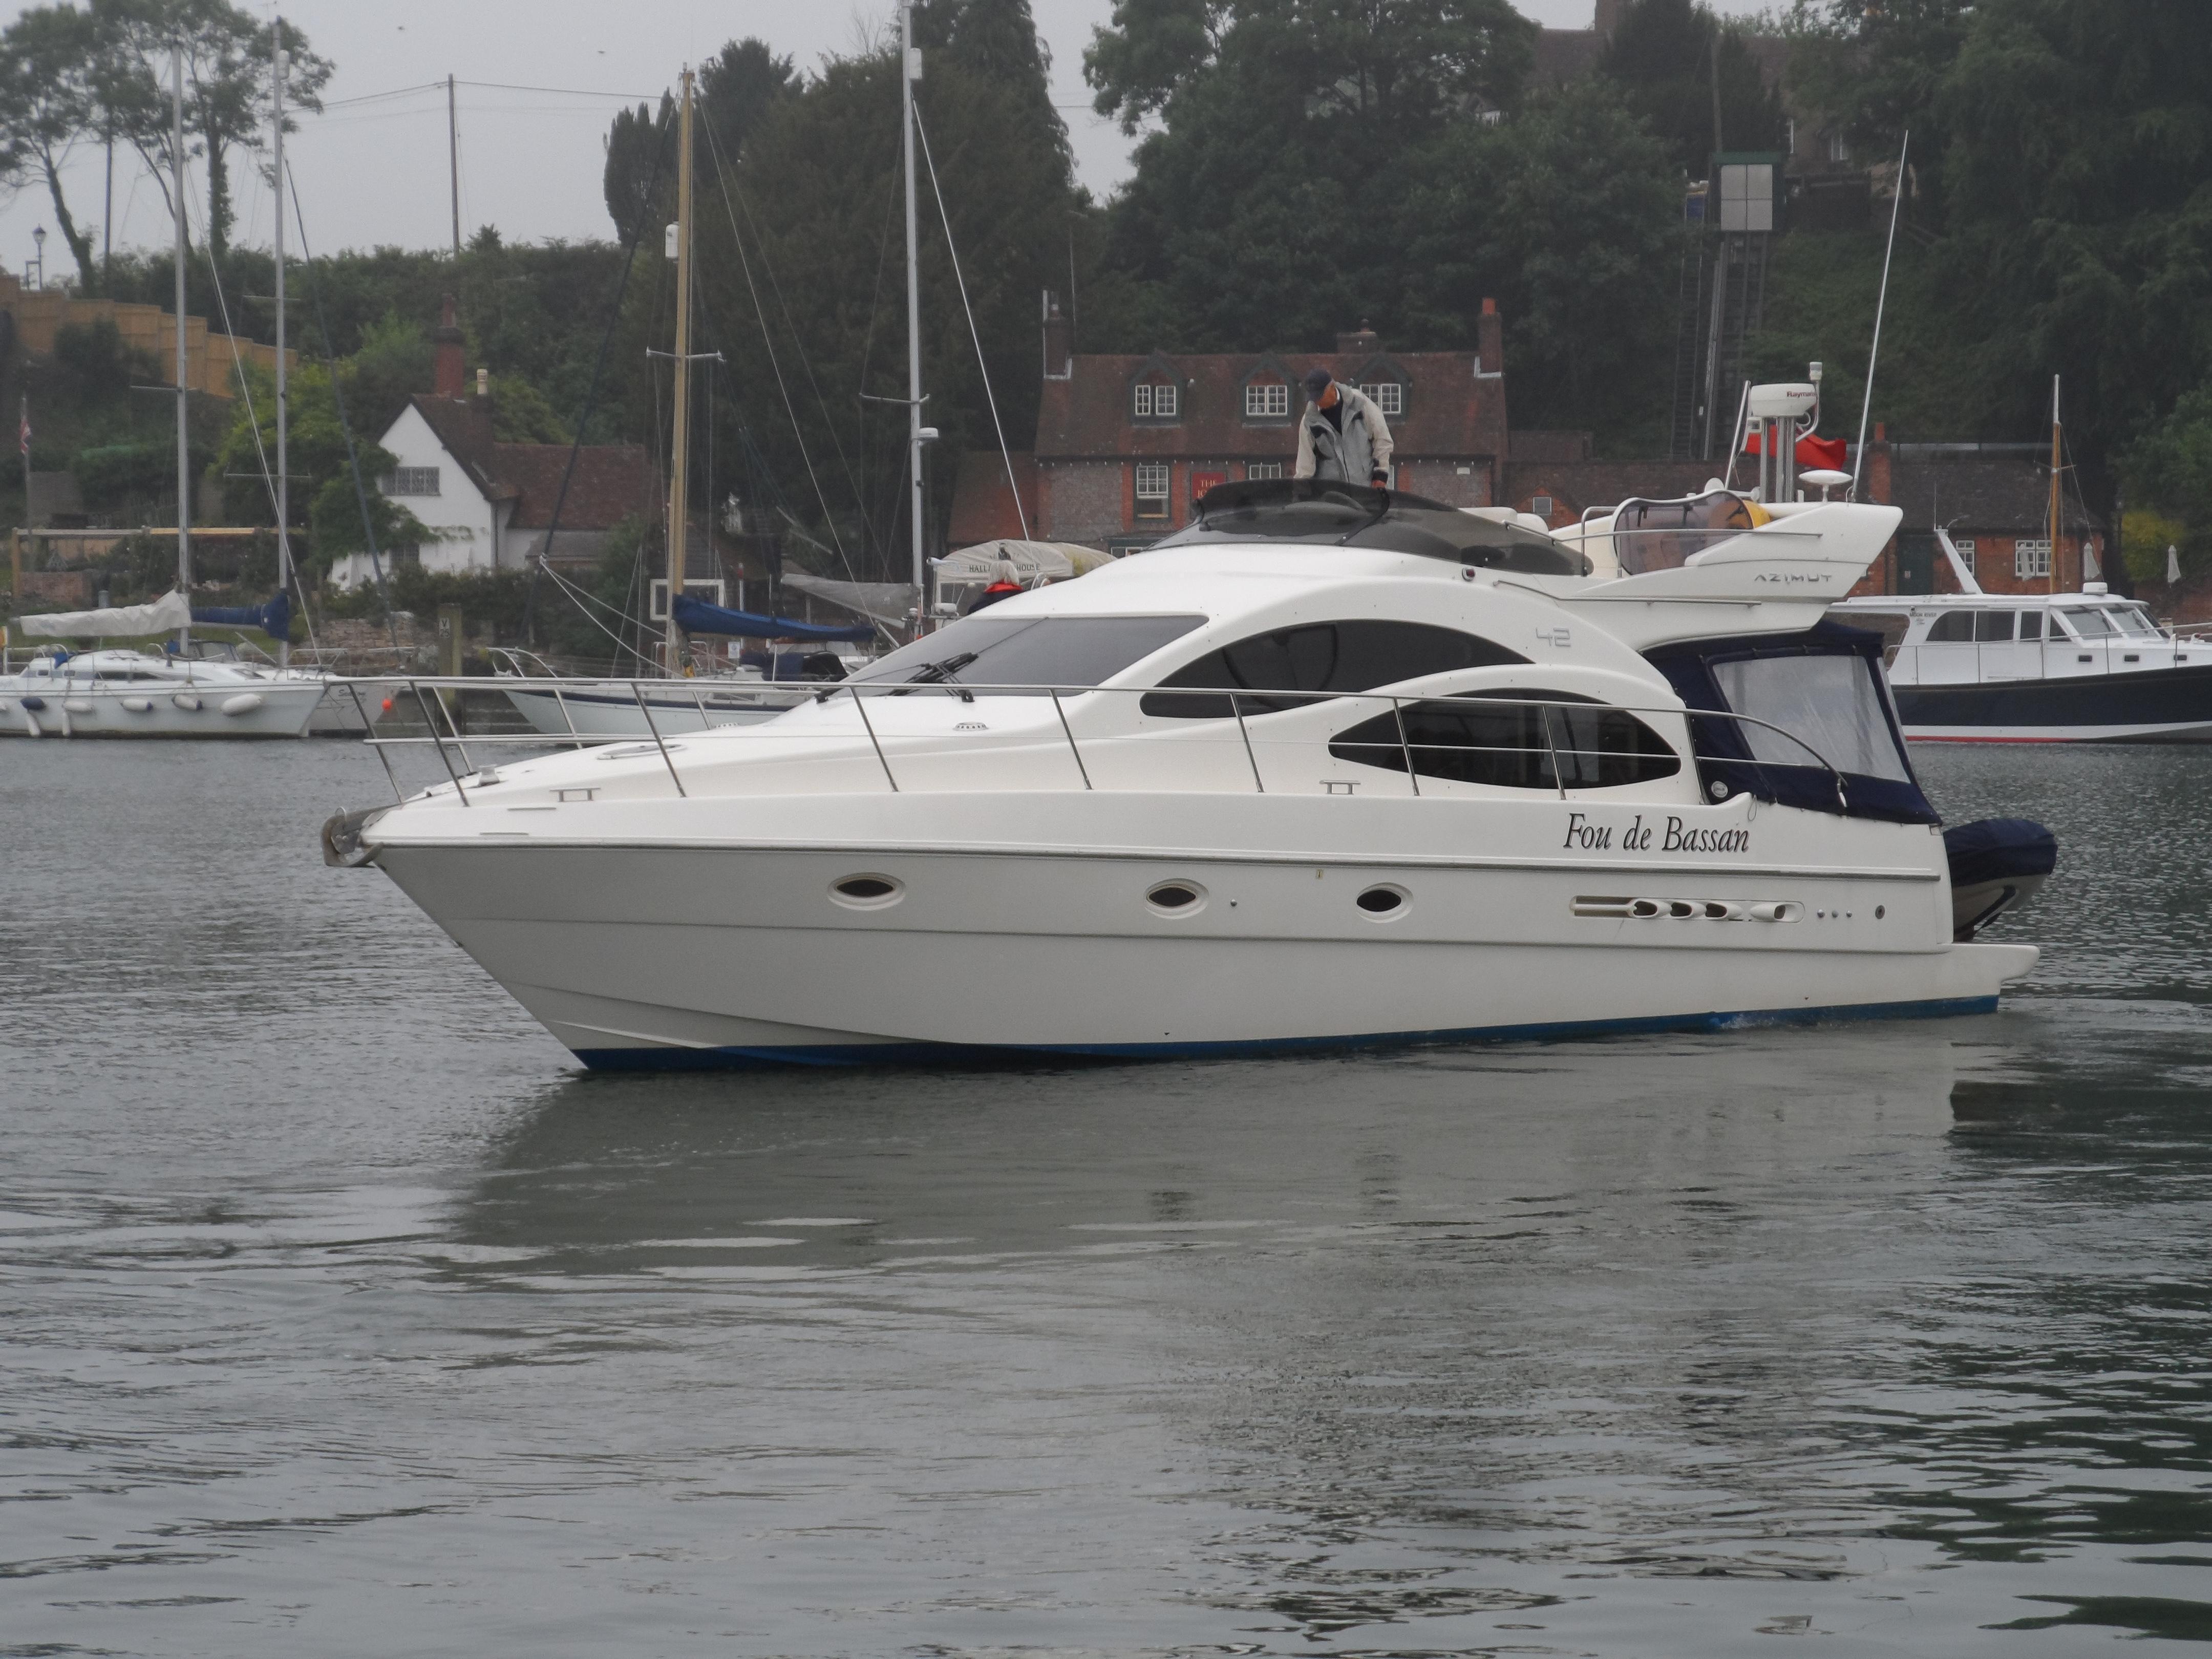 Azimut 42, Cowes, Isle of Wight